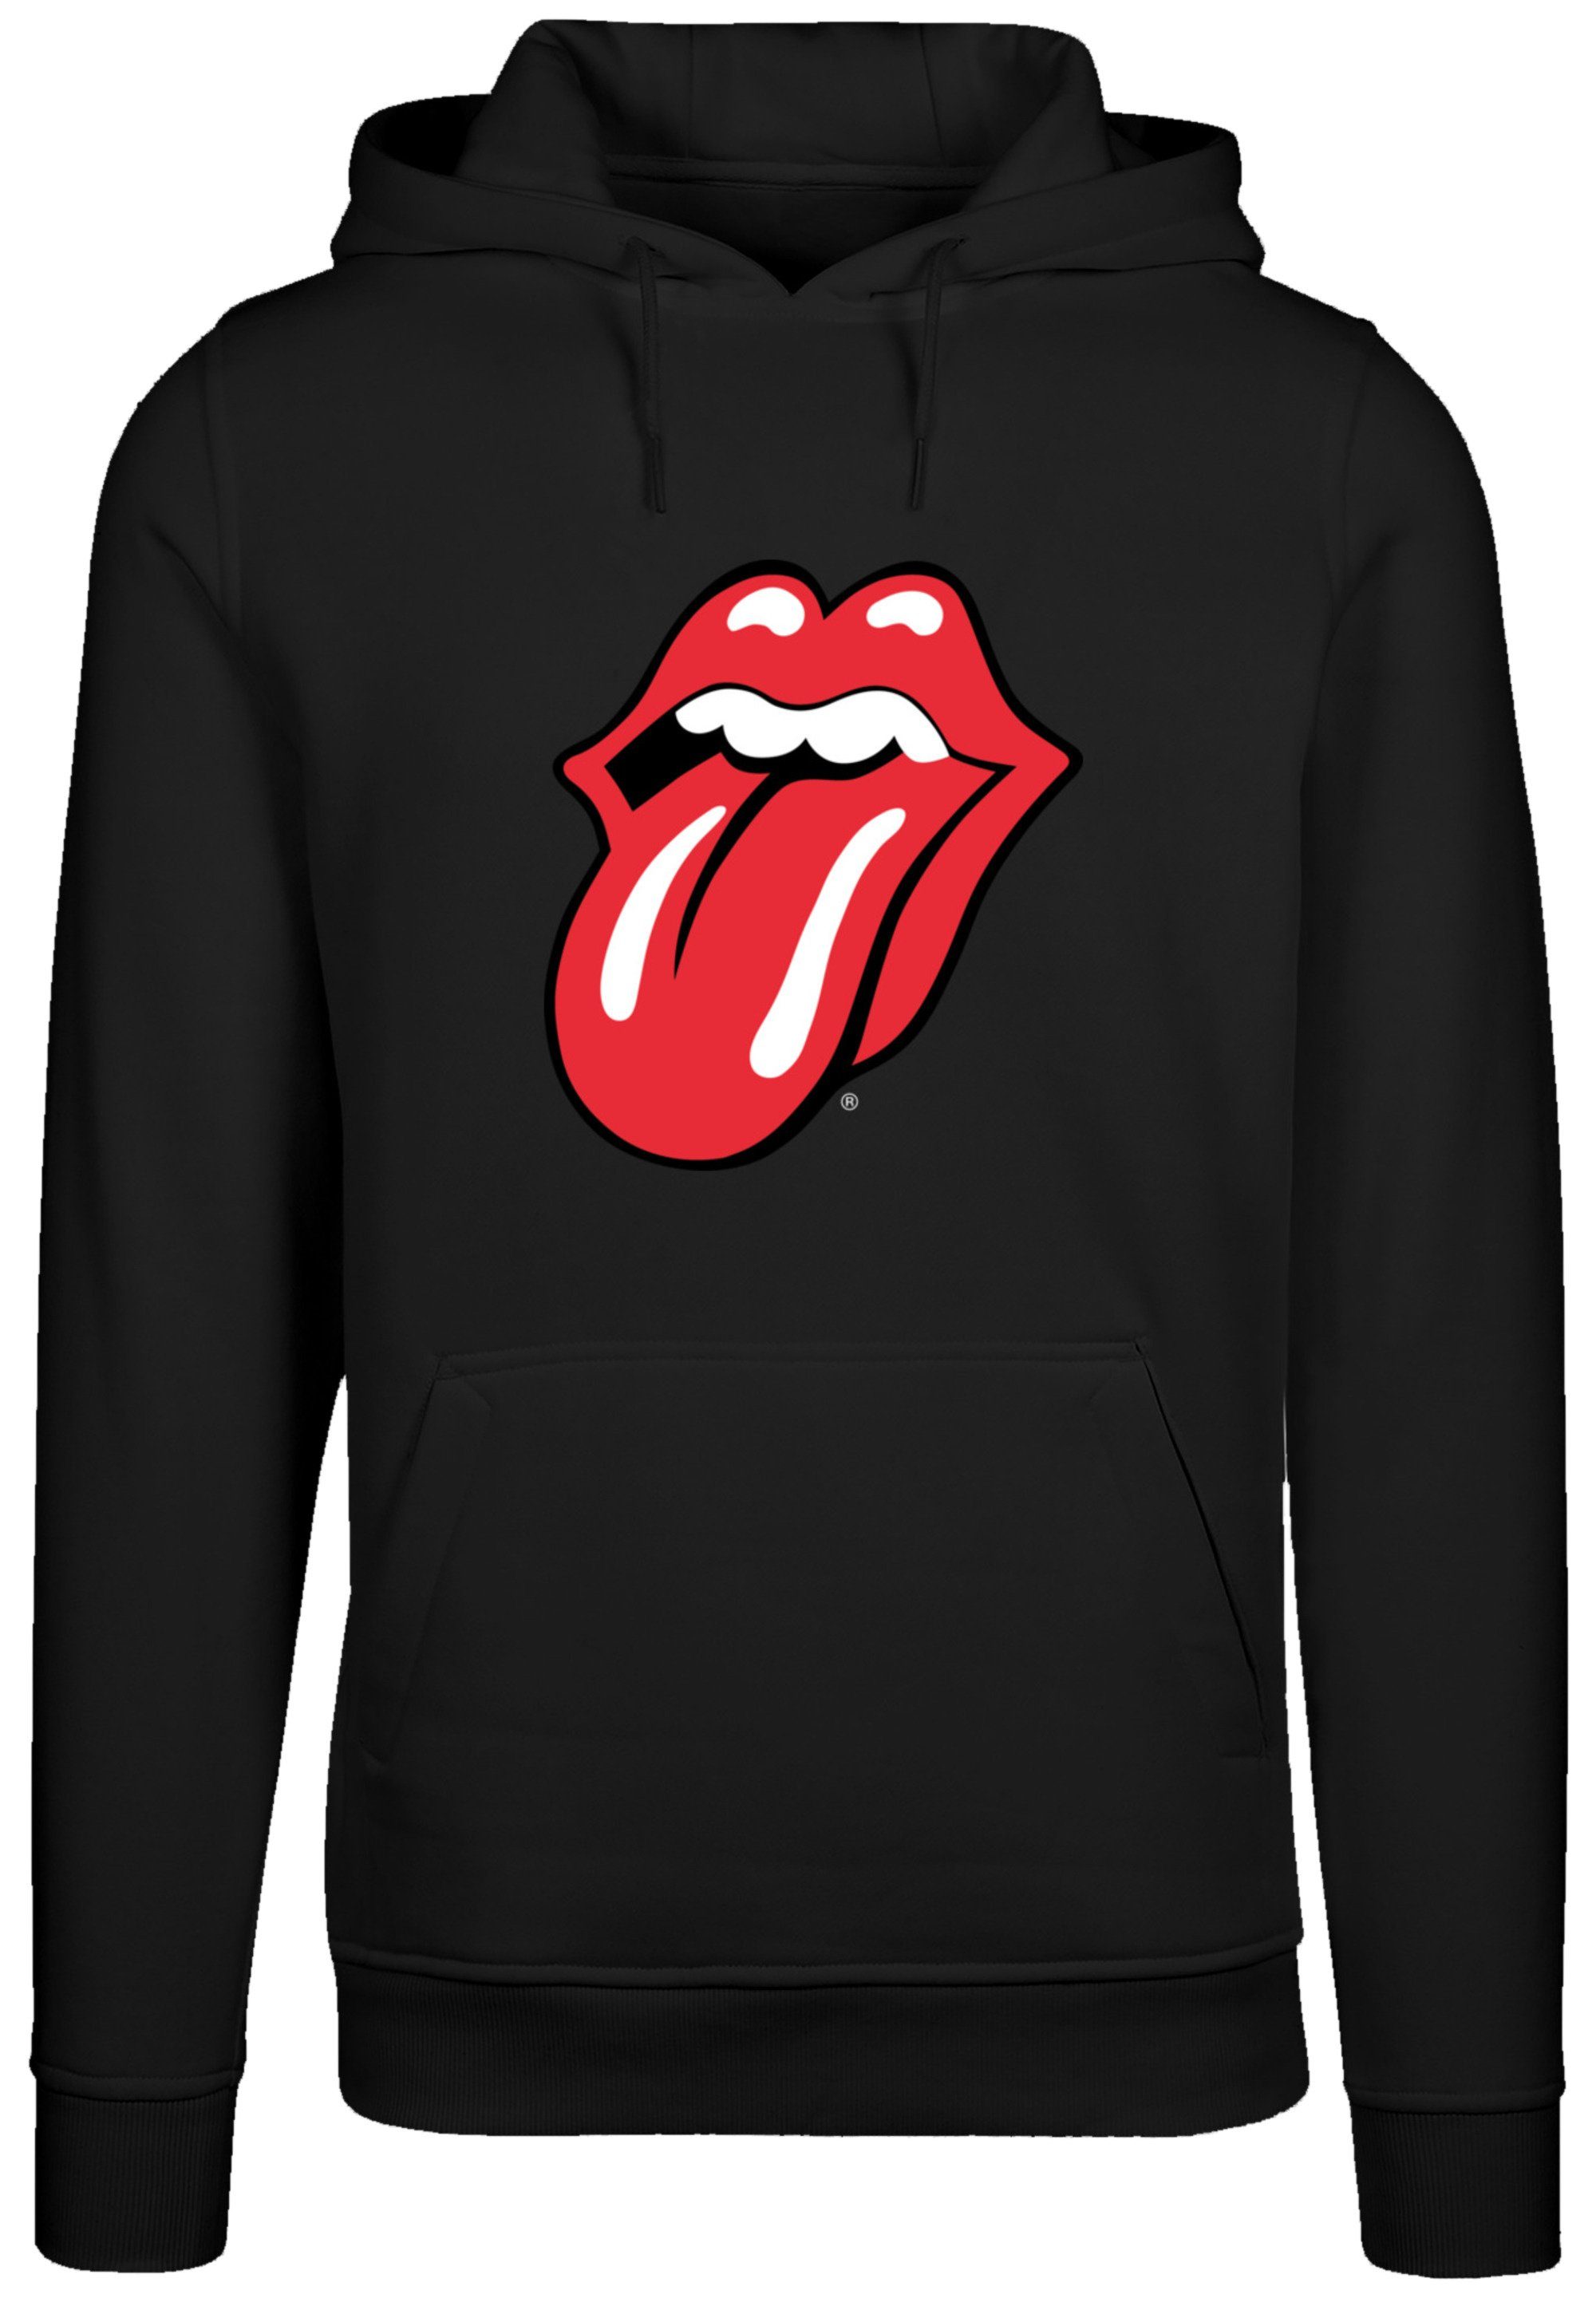 schwarz Rolling The Kapuzenpullover Warm, Band Rock Zunge Classic Stones Musik Bequem F4NT4STIC Hoodie,